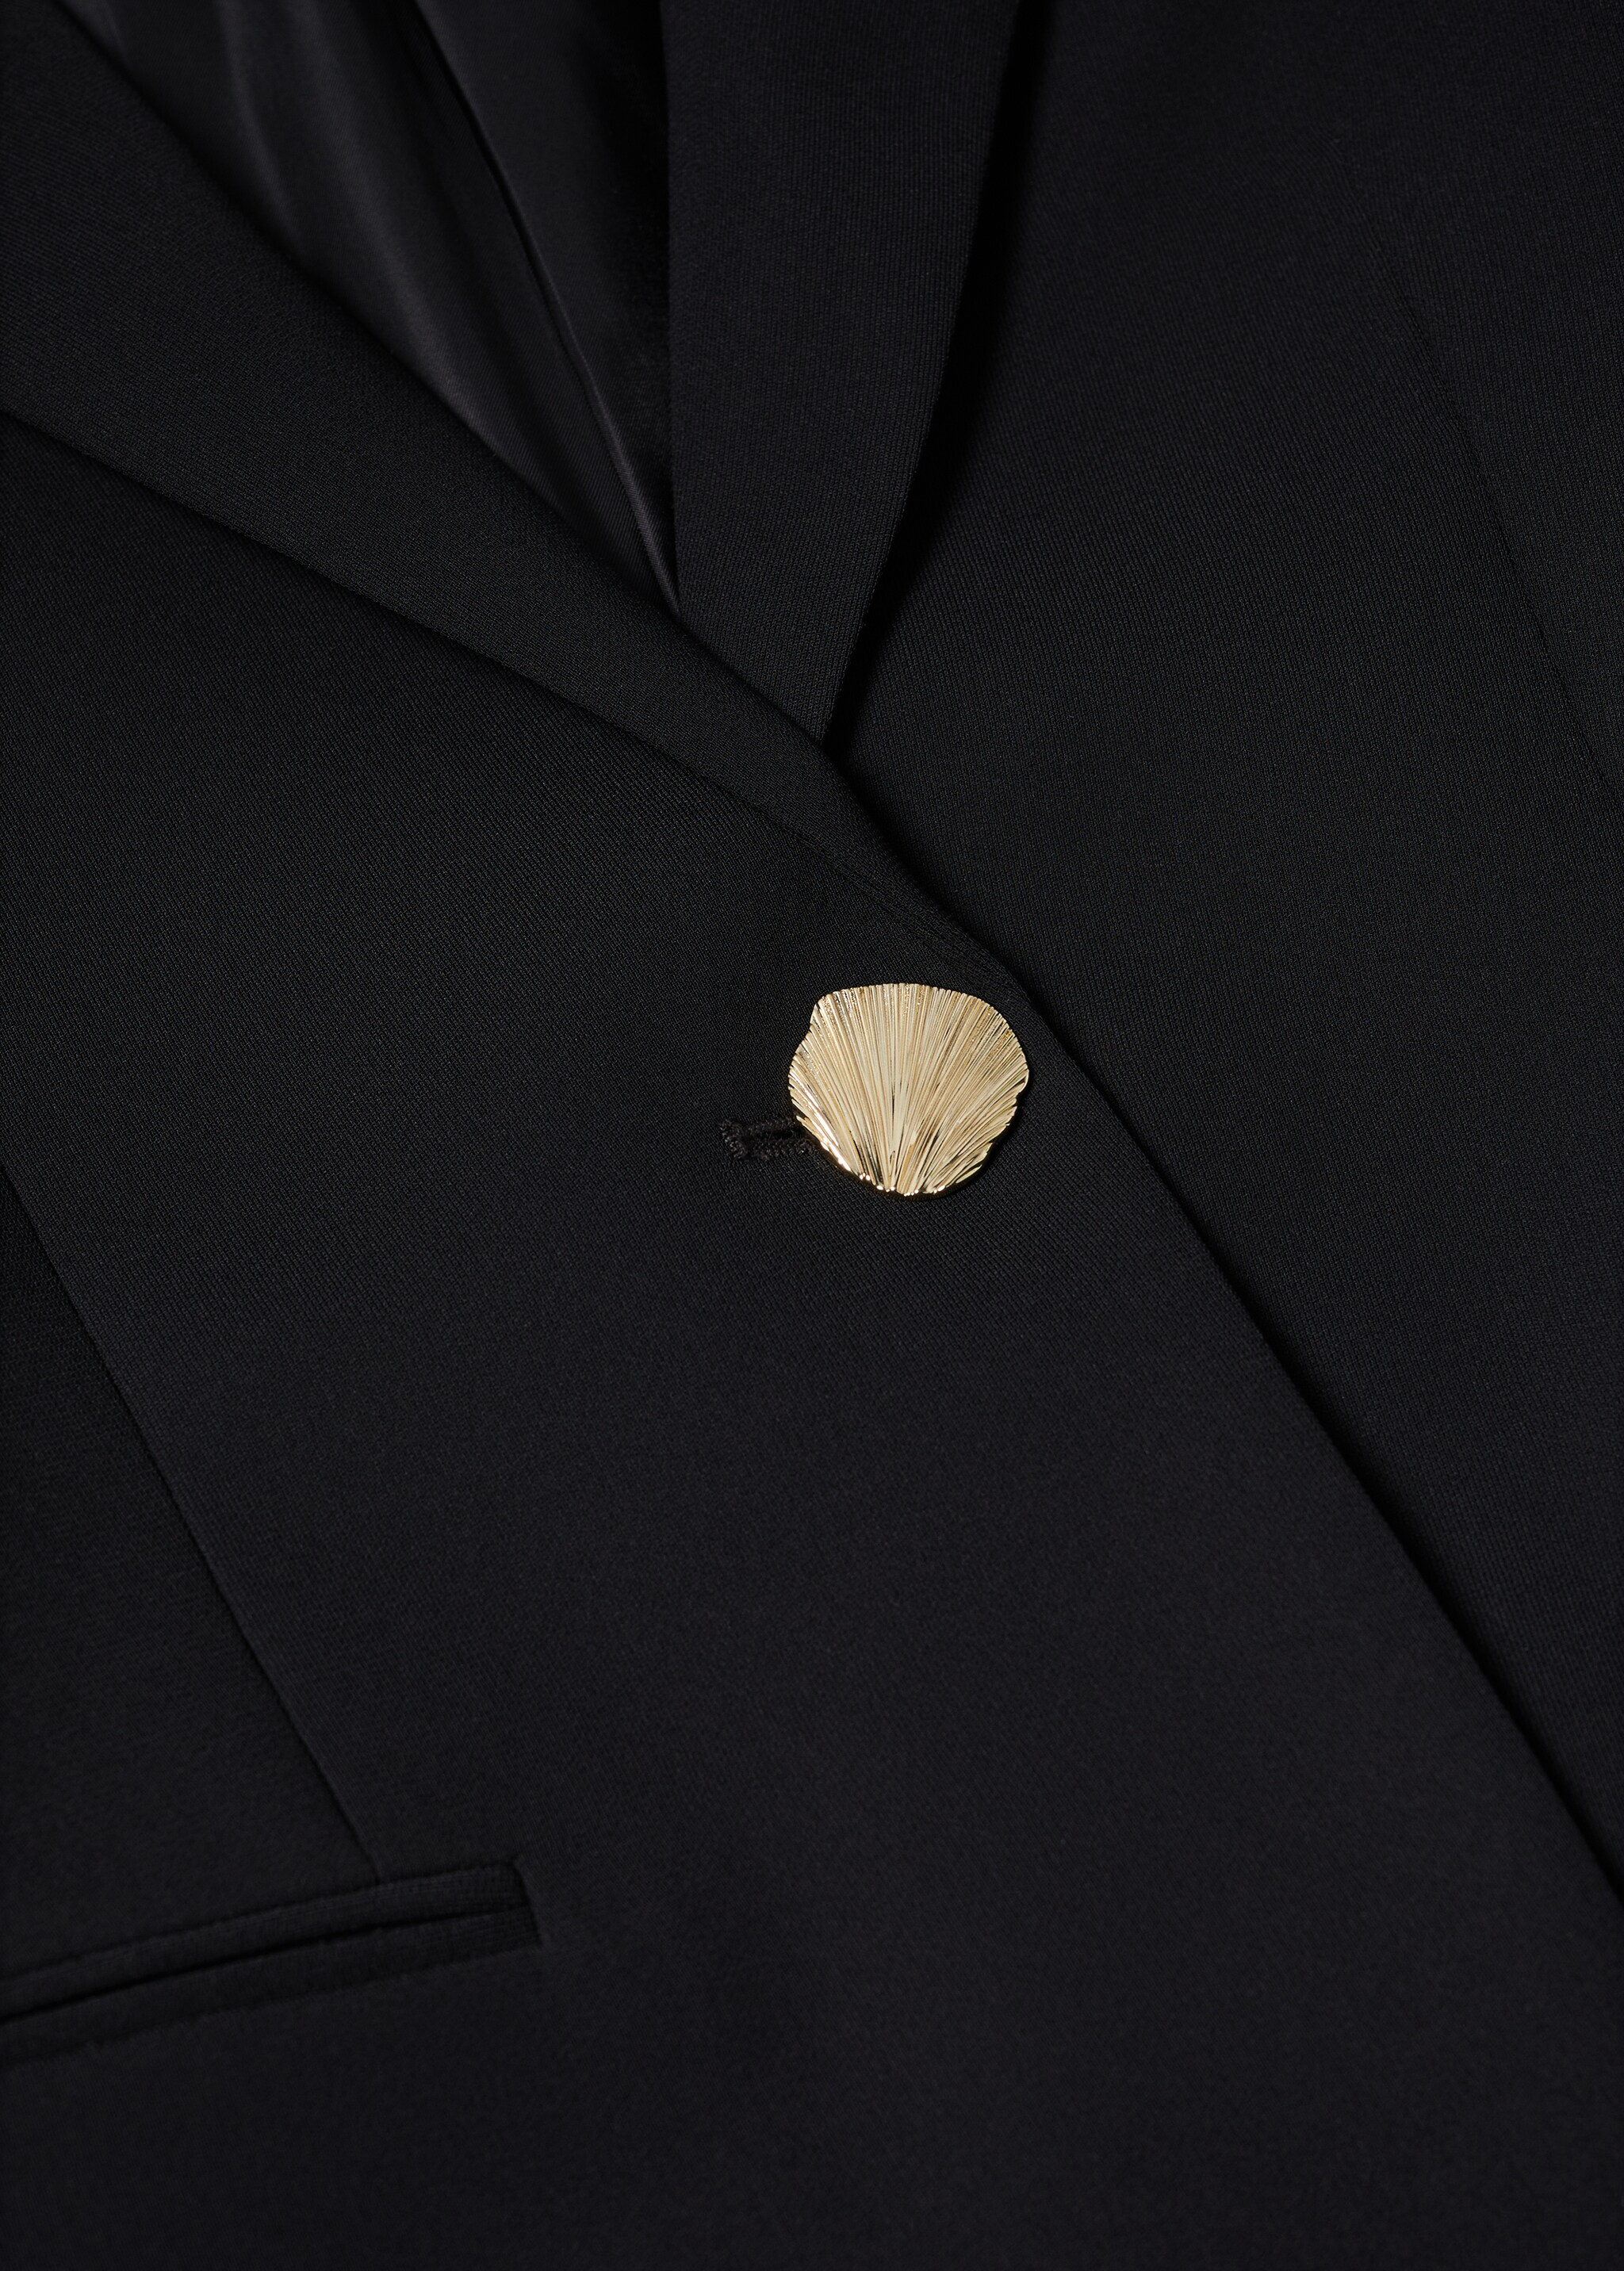 Suit jacket with buttons  - Details of the article 8